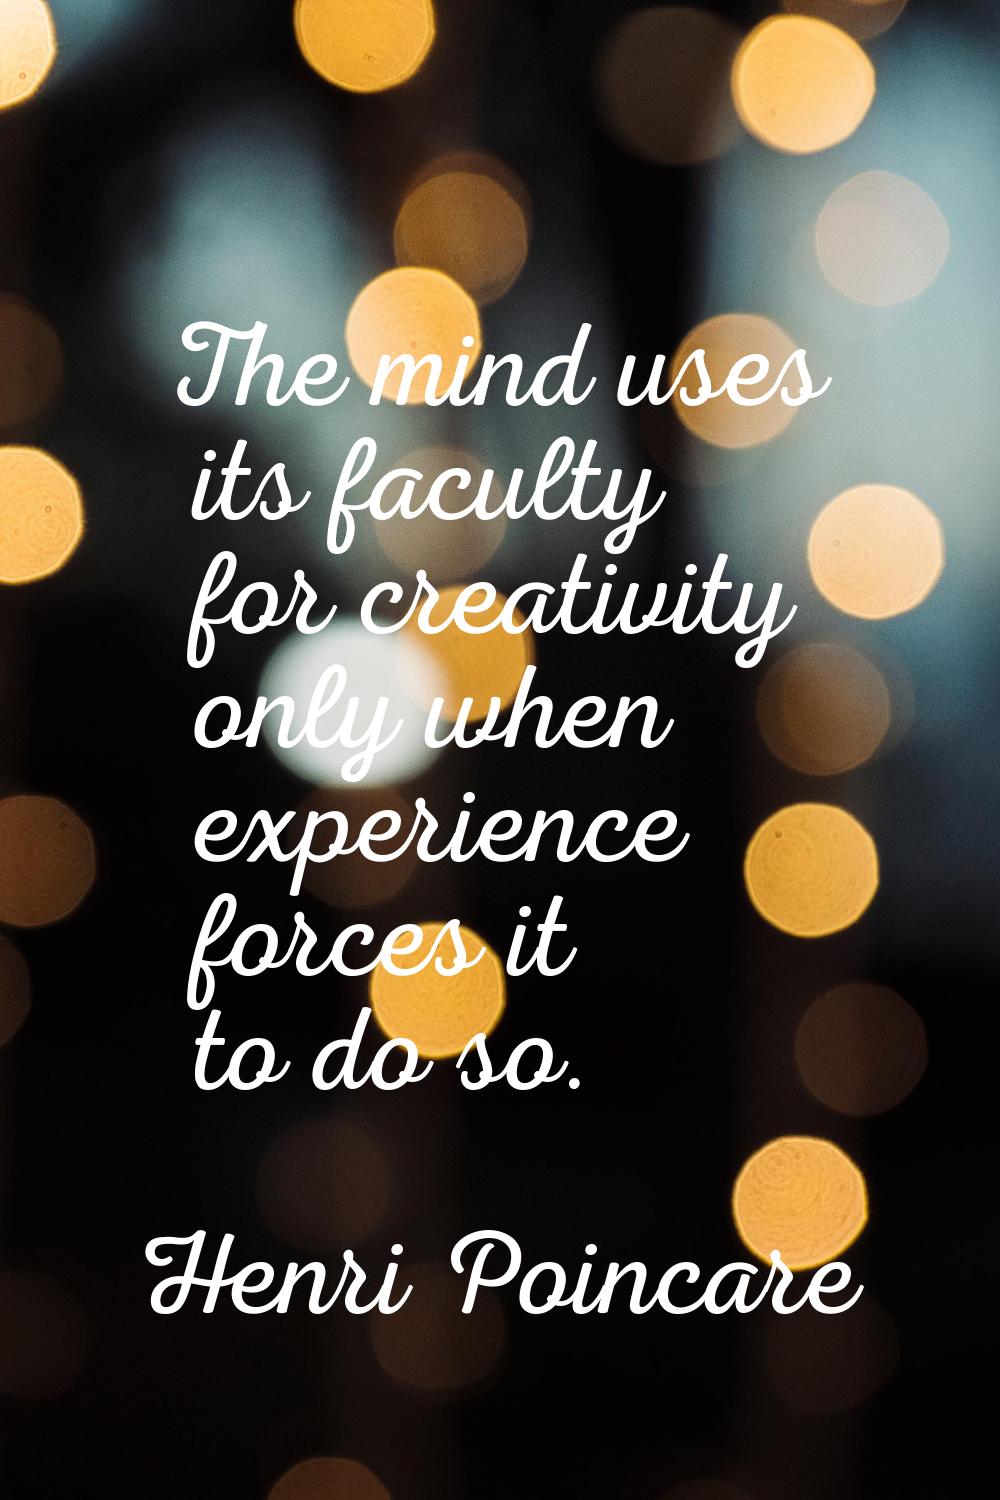 The mind uses its faculty for creativity only when experience forces it to do so.